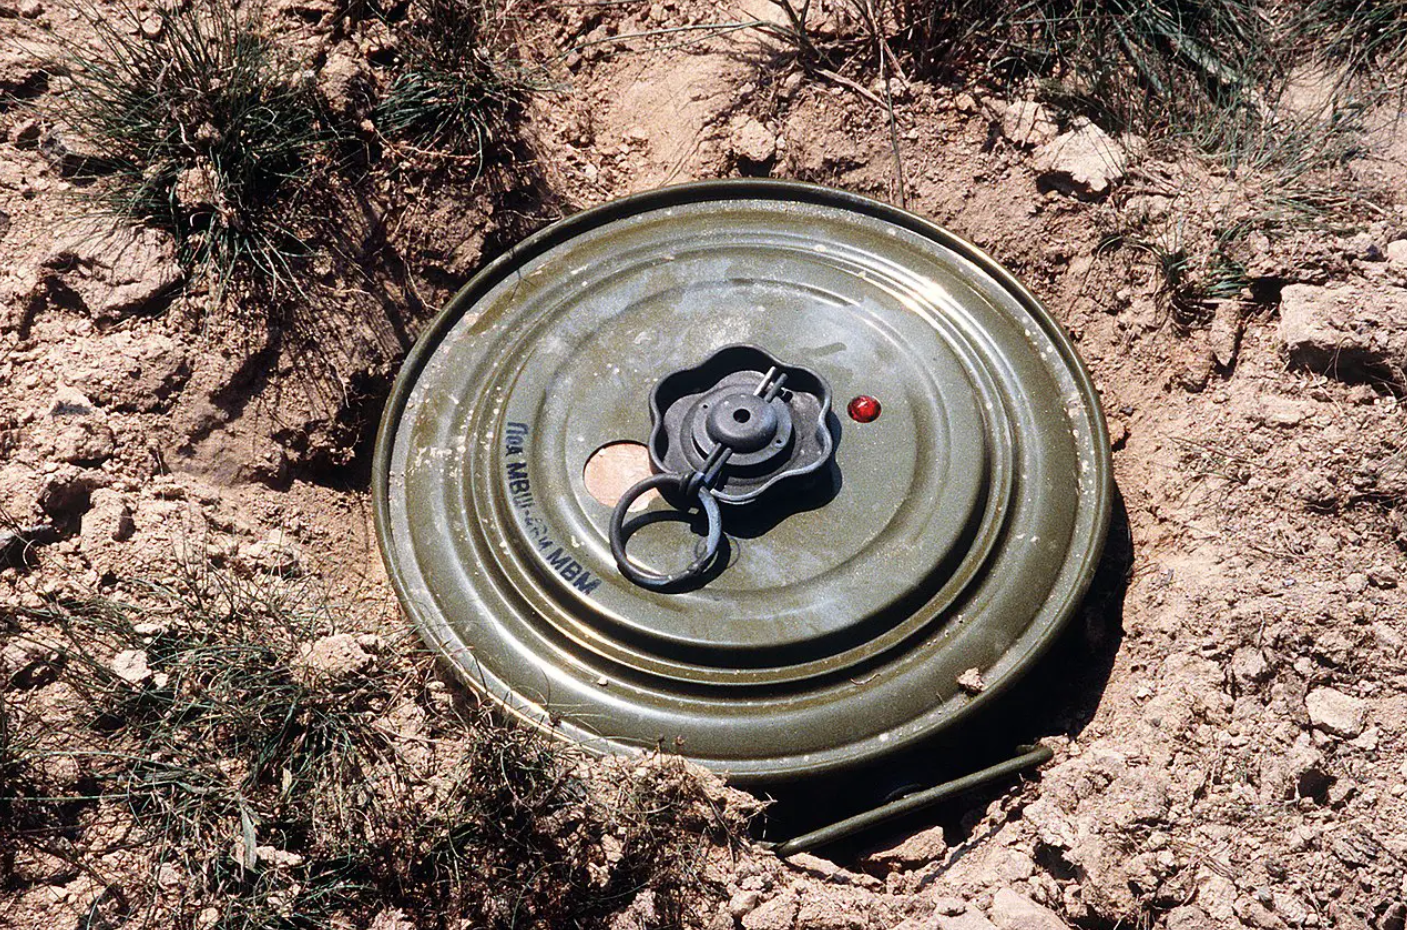 A Russian tank mine is seen on the ground. It is surrounded by dirt, seemingly before being buried.